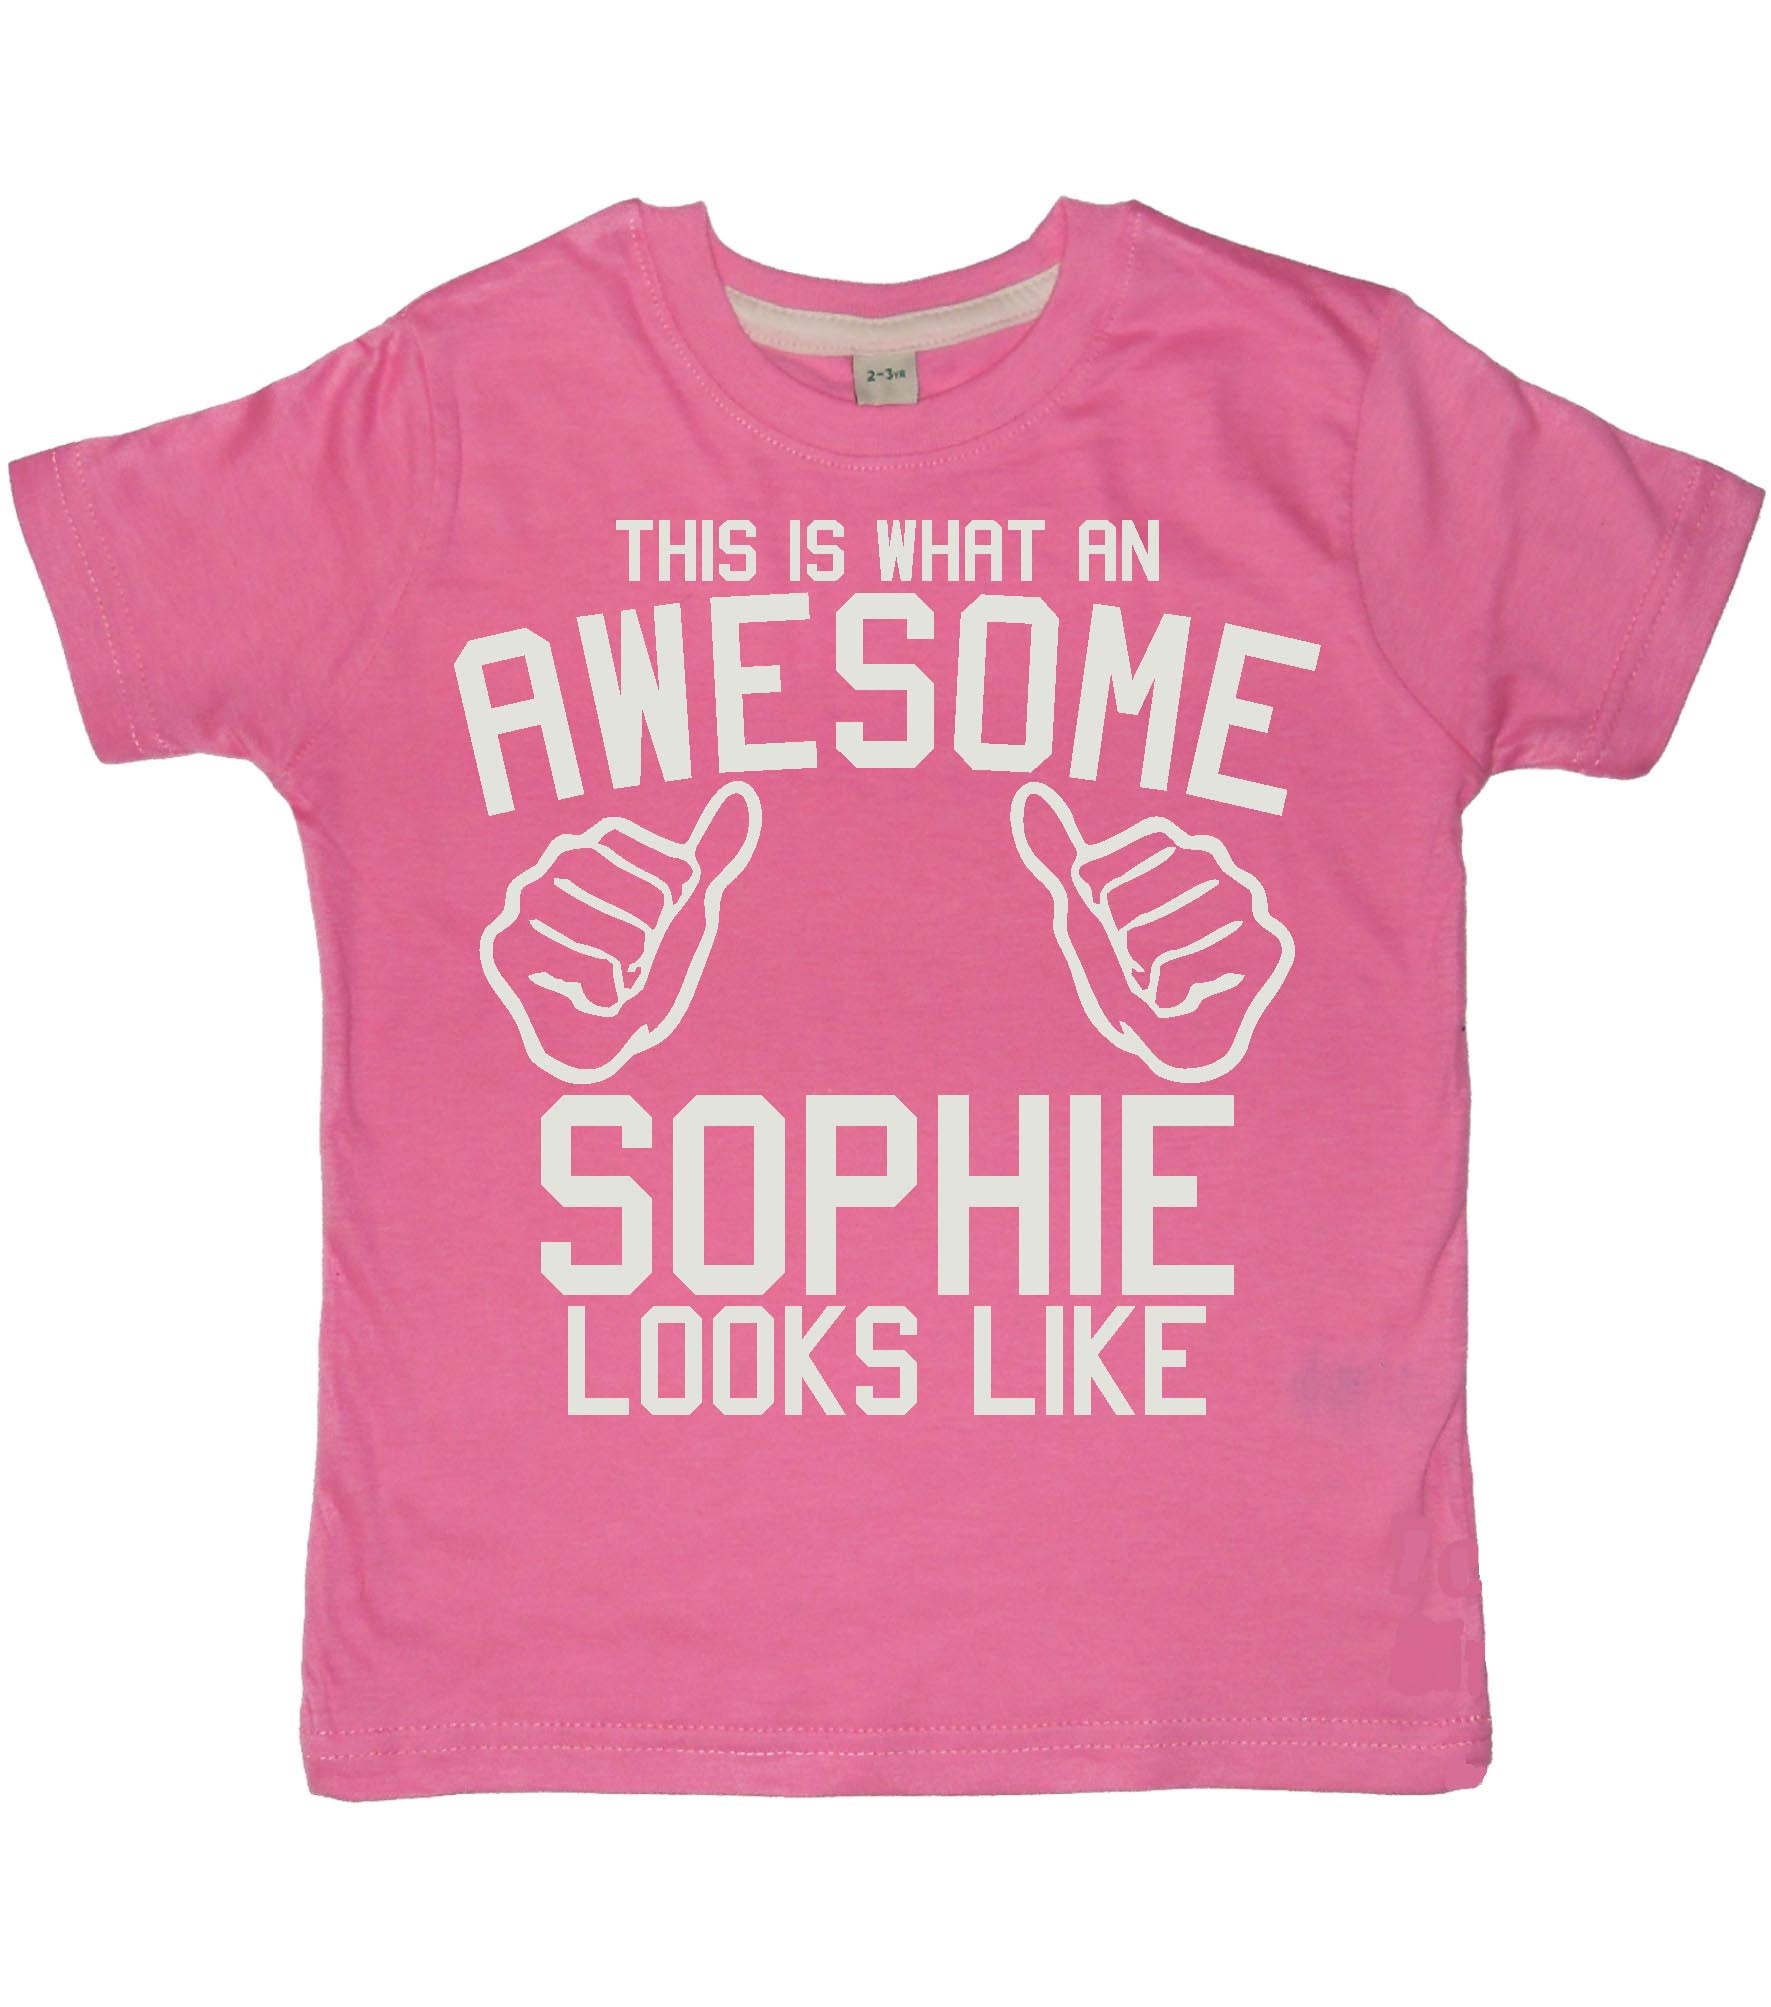 This is what an Awesome (Name) looks like Children's T-shirt